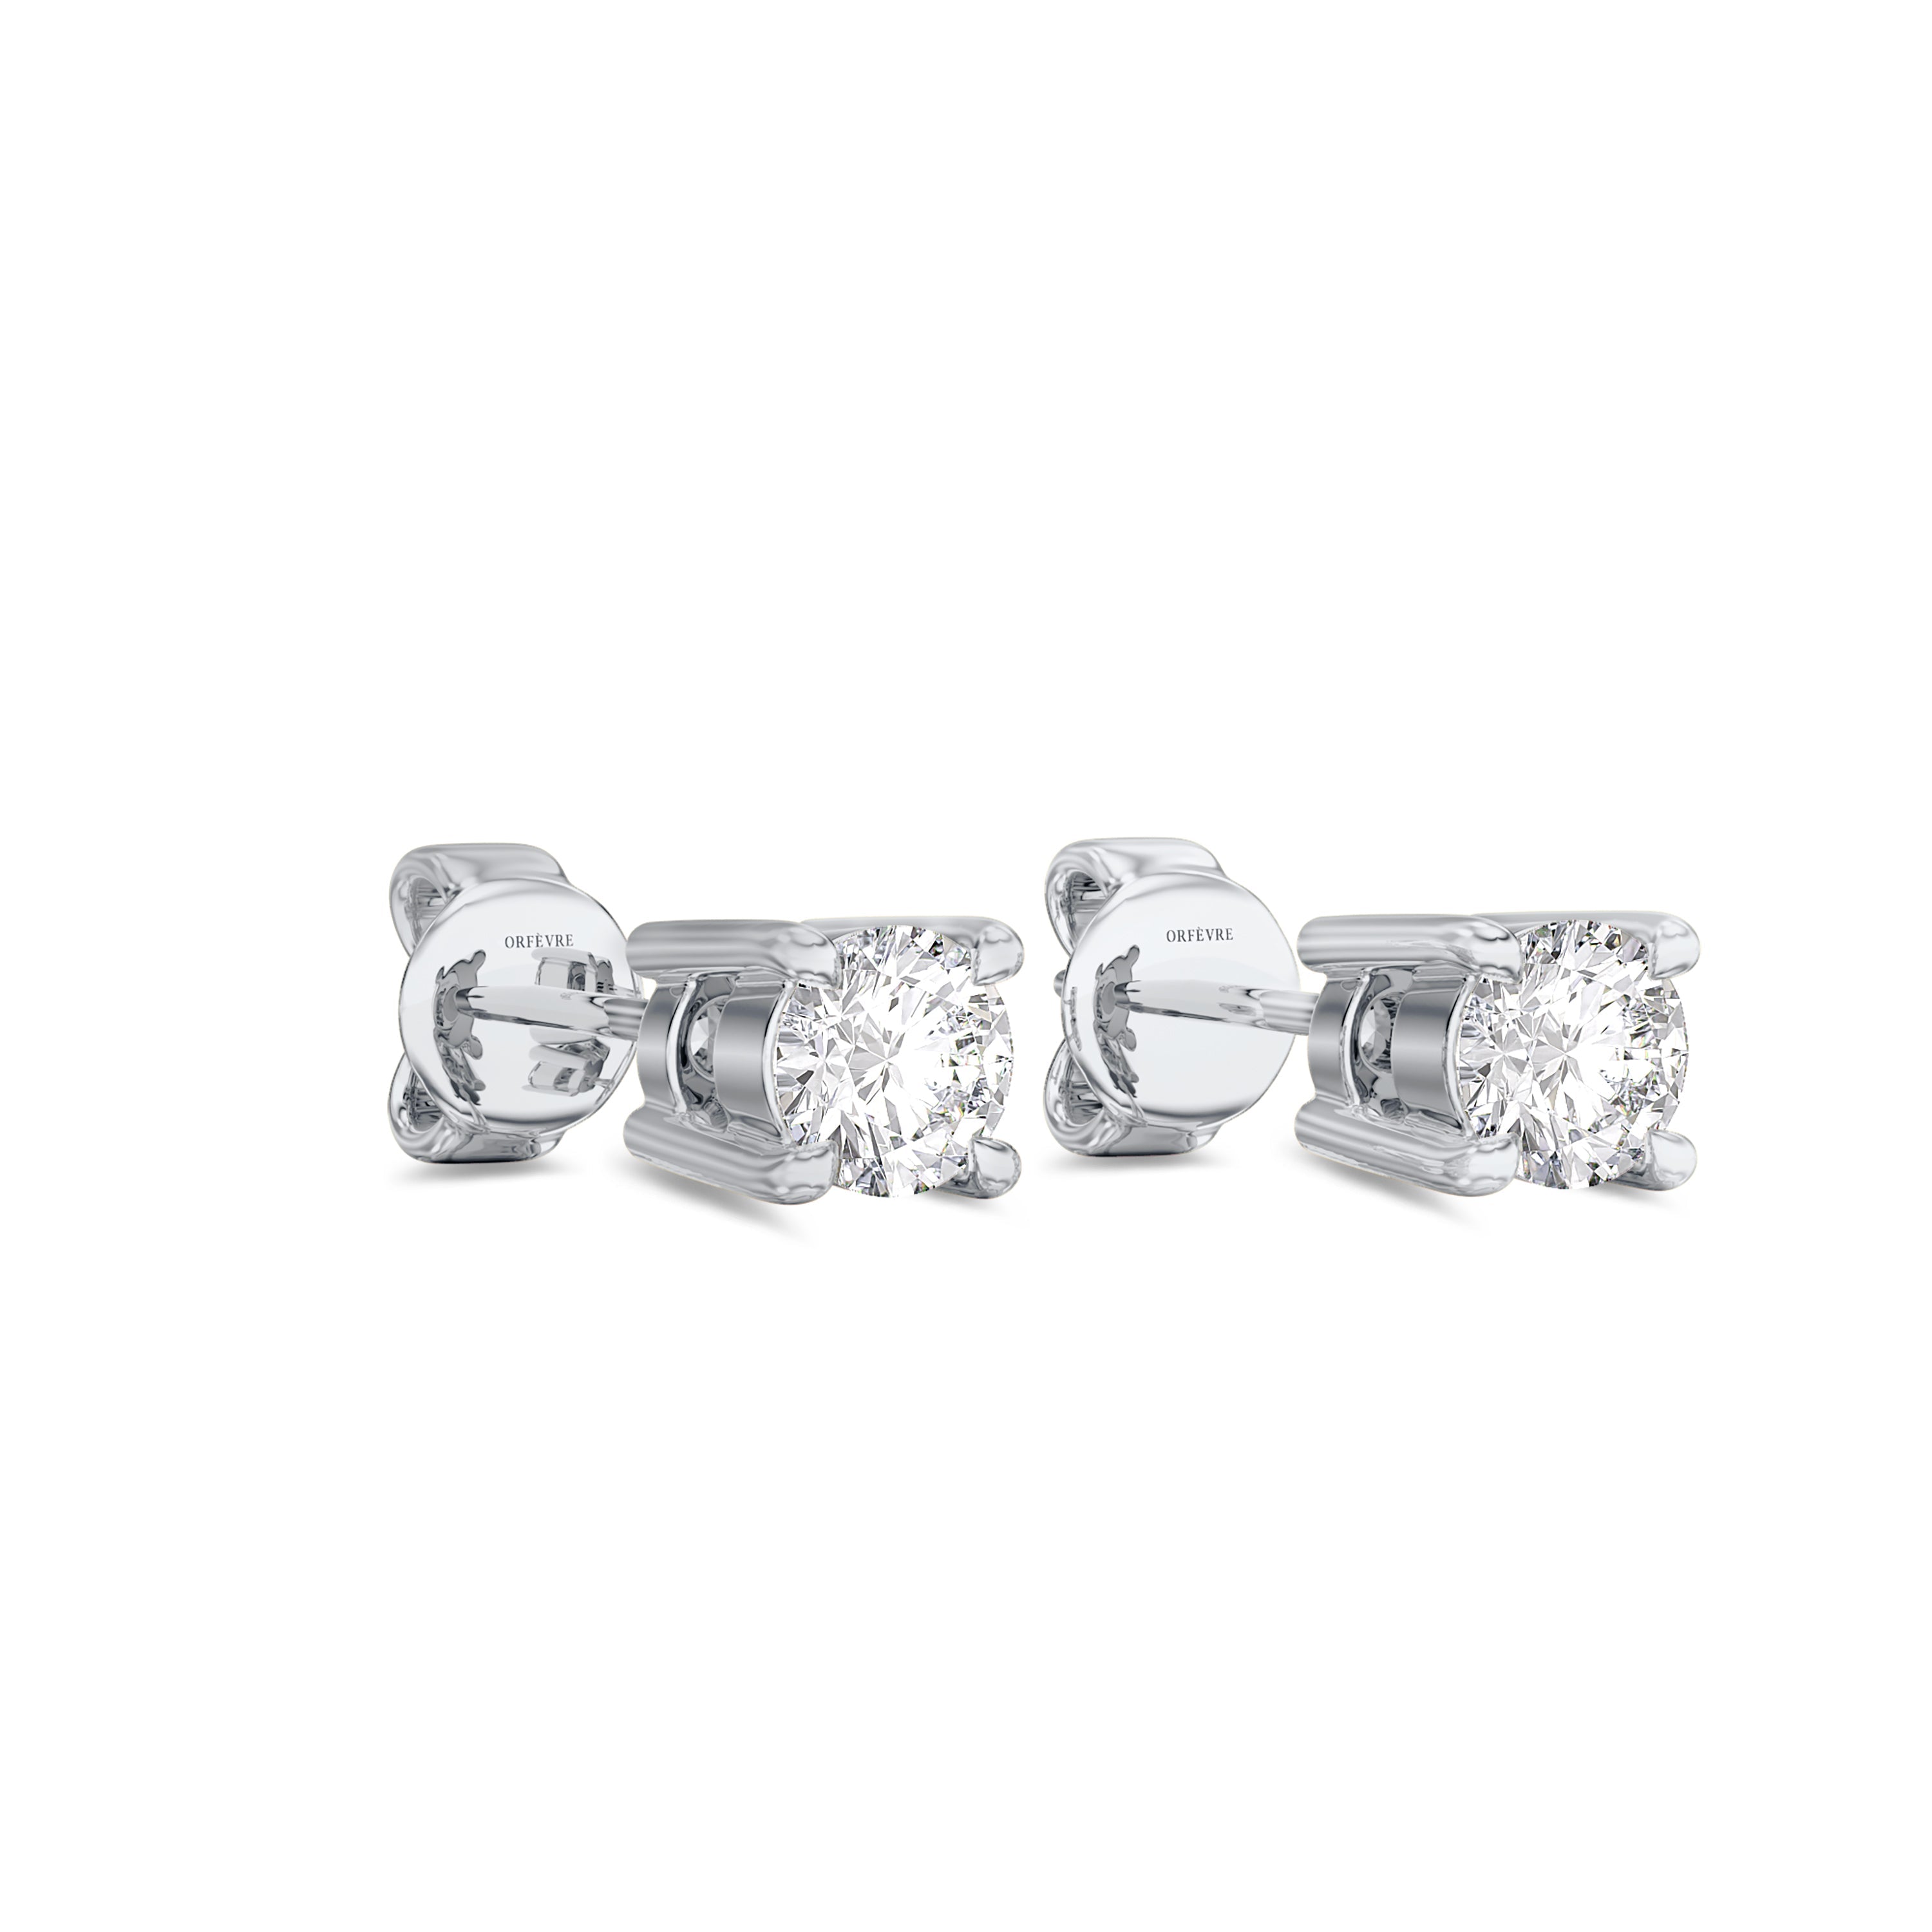 0.20 carat solitaire round cut diamond earrings in GH color and SI clarity